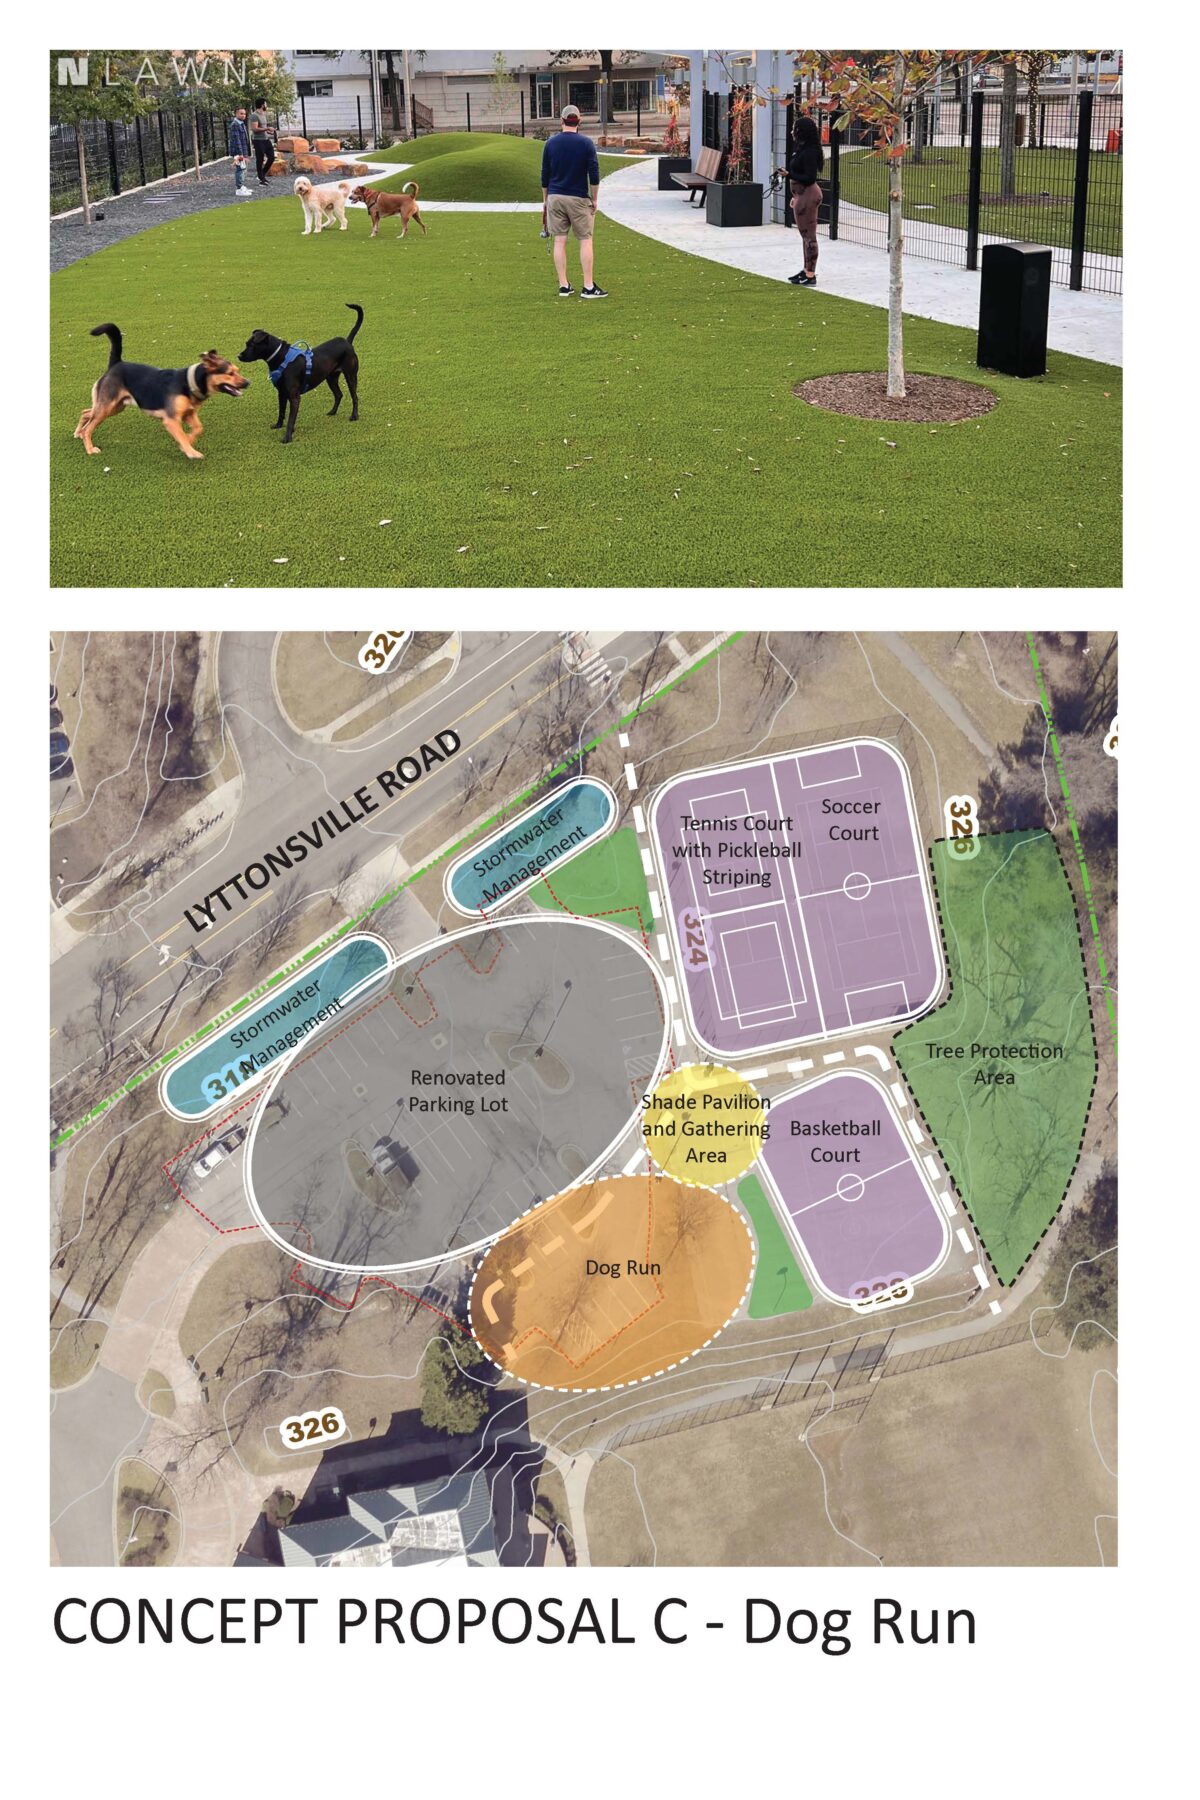 Image of dogs in a dog park. Image of a map of Rosemary Hills - Lyttonsville Local Park with locations of new amenities such as a a dog run, shade pavilion, and updated courts